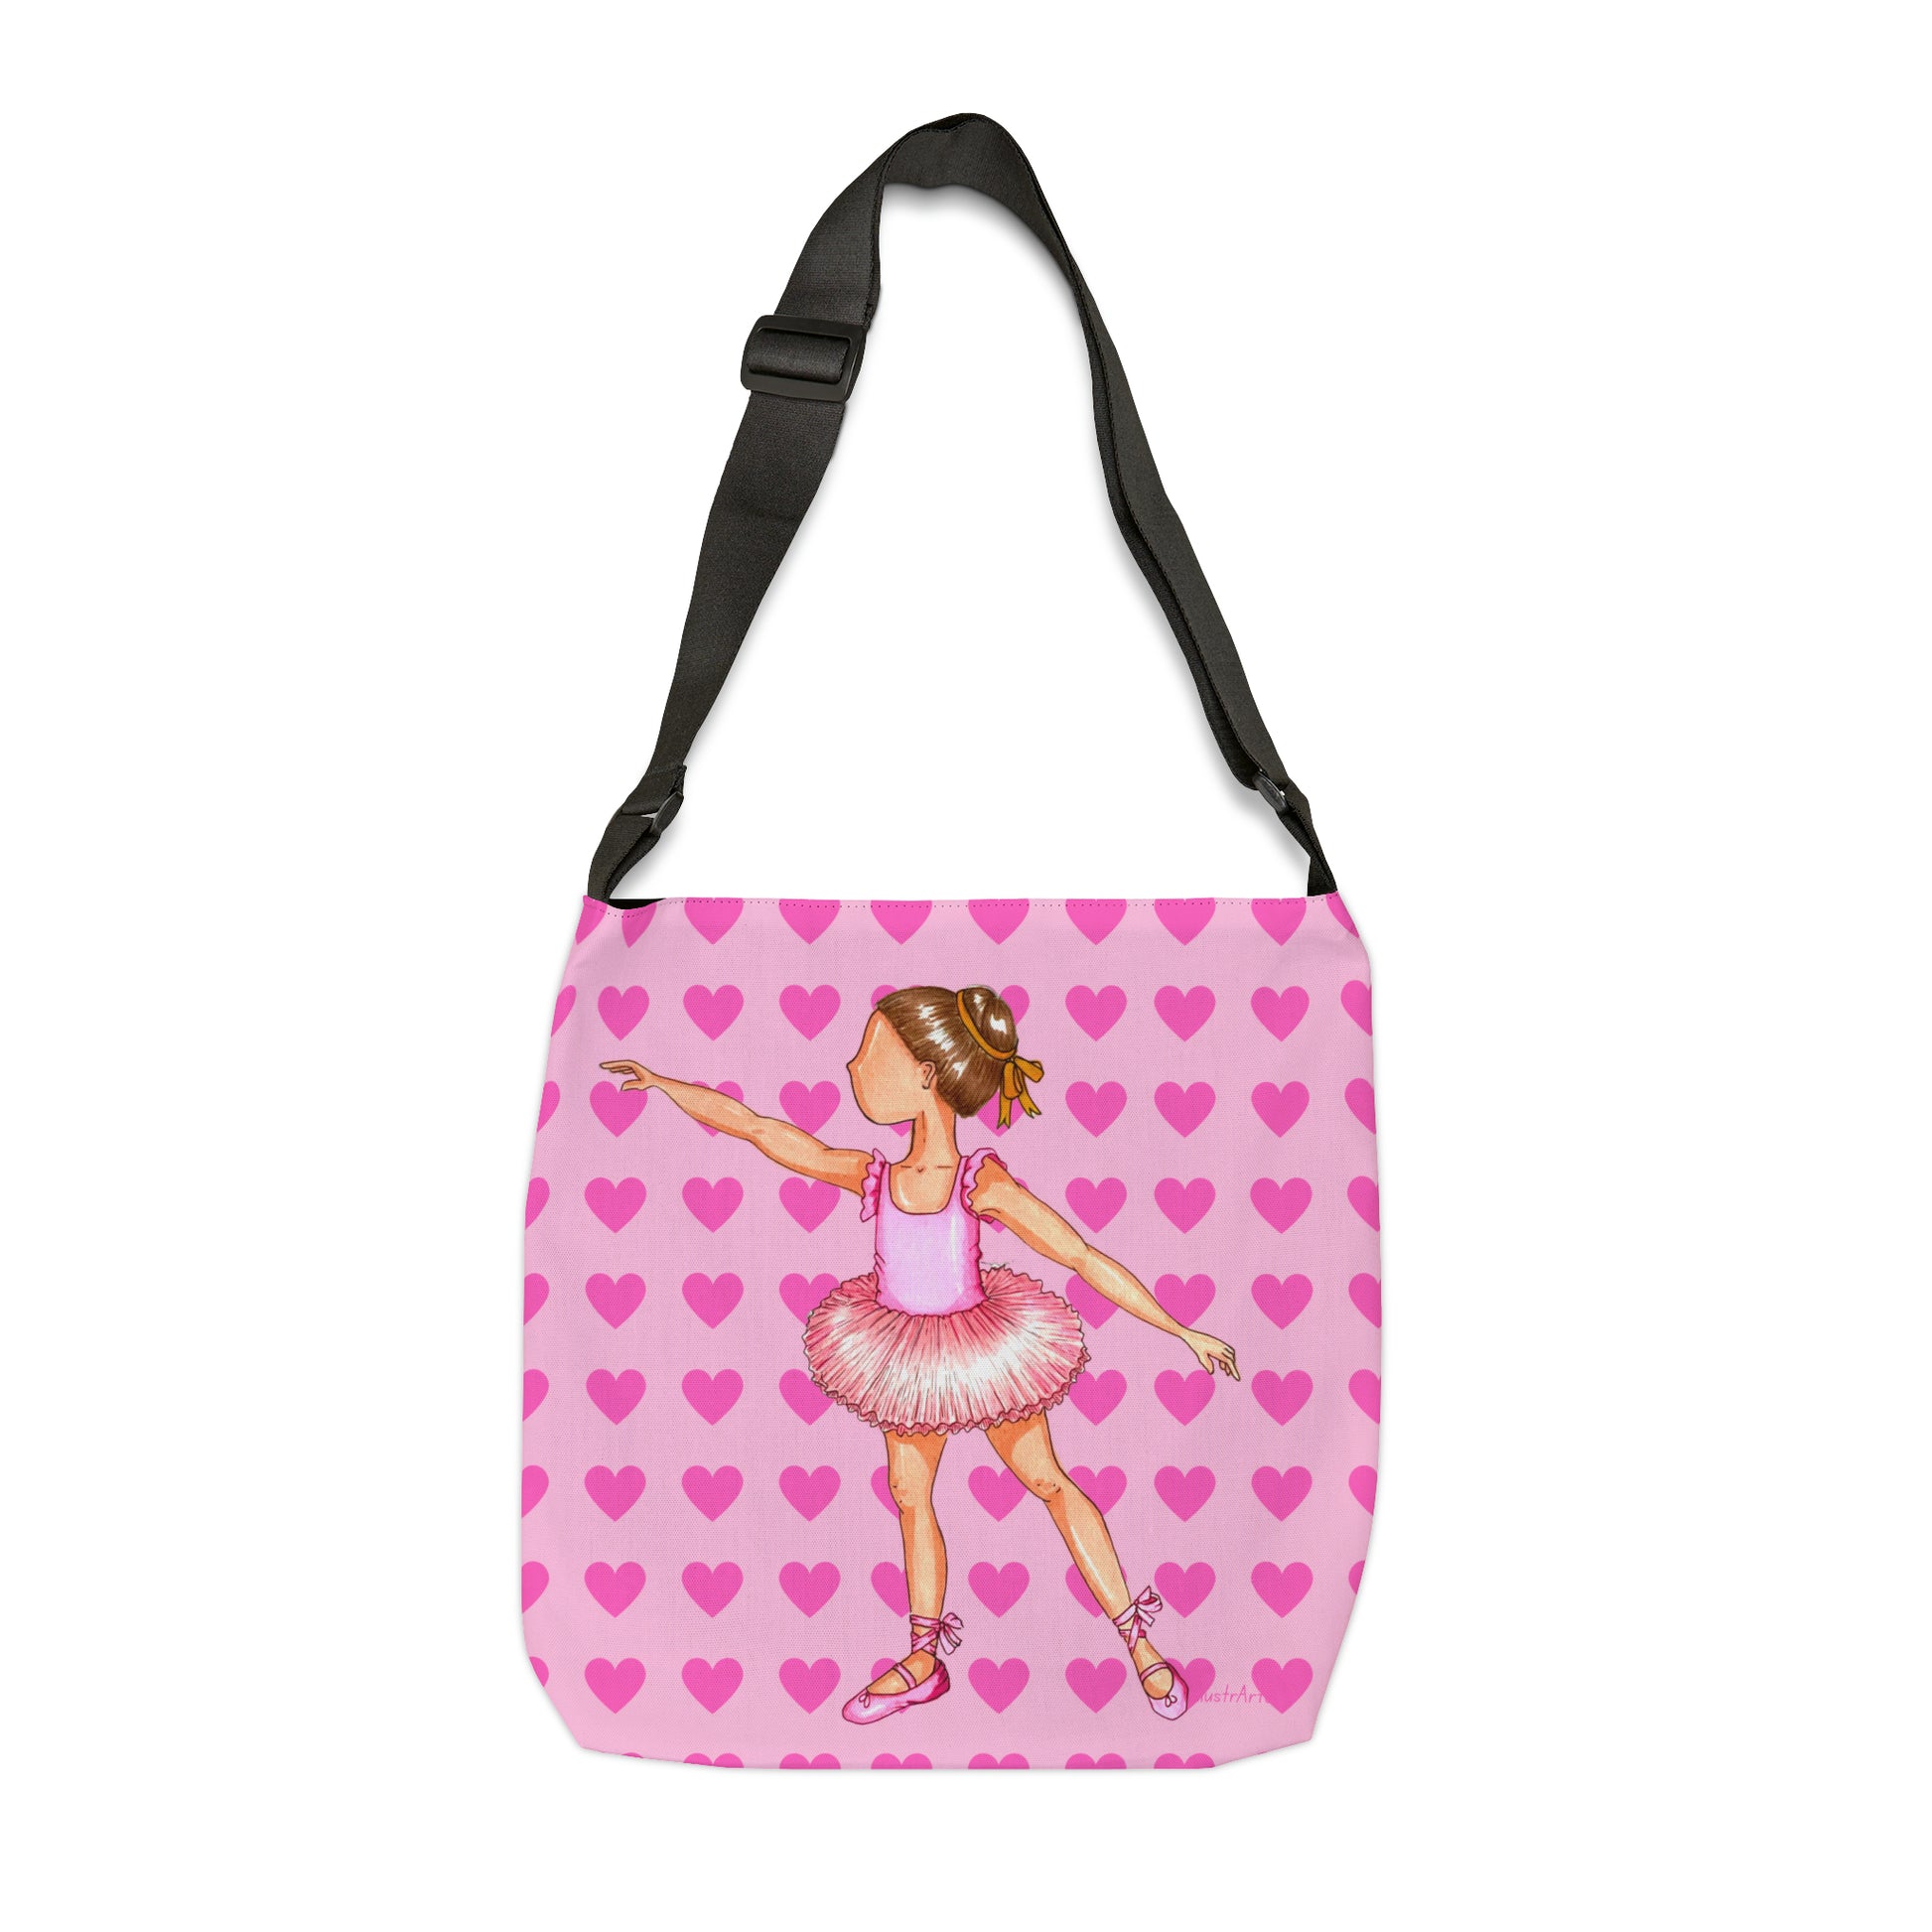 Ballerina Girl Tote Bag with zip, pink dress and pink hearts - IllustrArte